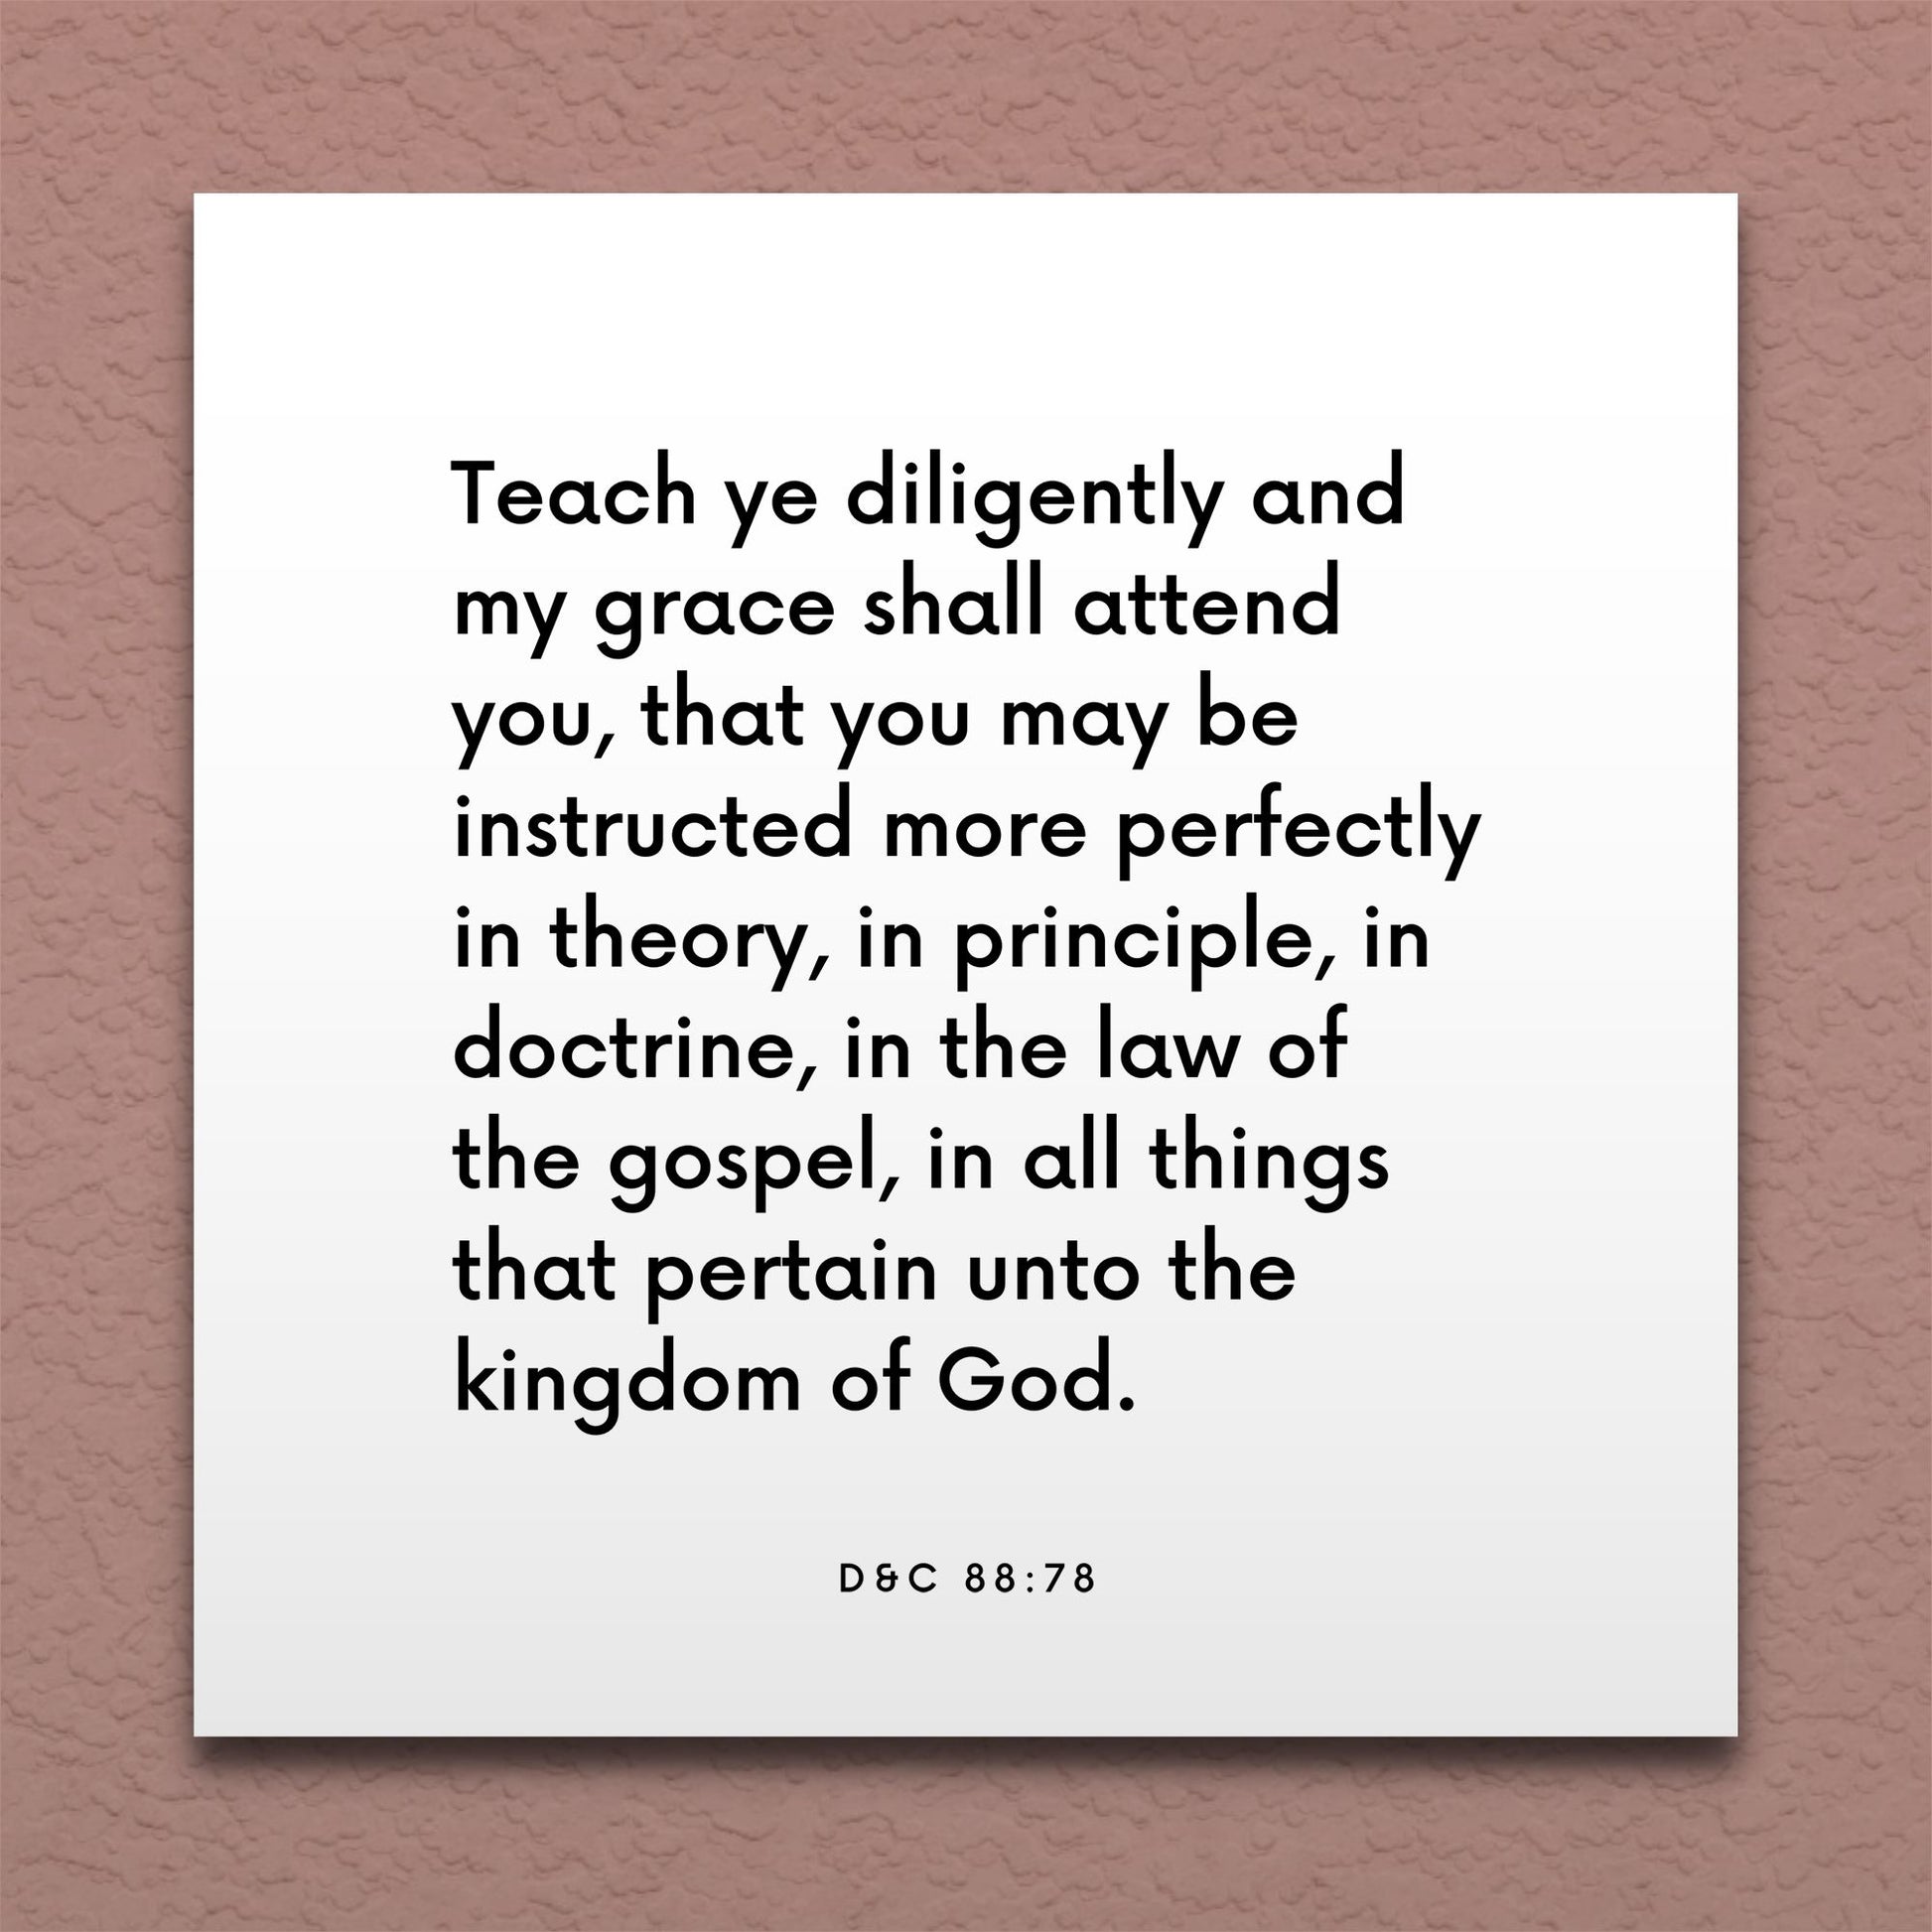 Wall-mounted scripture tile for D&C 88:78 - "Teach ye diligently and my grace shall attend you"